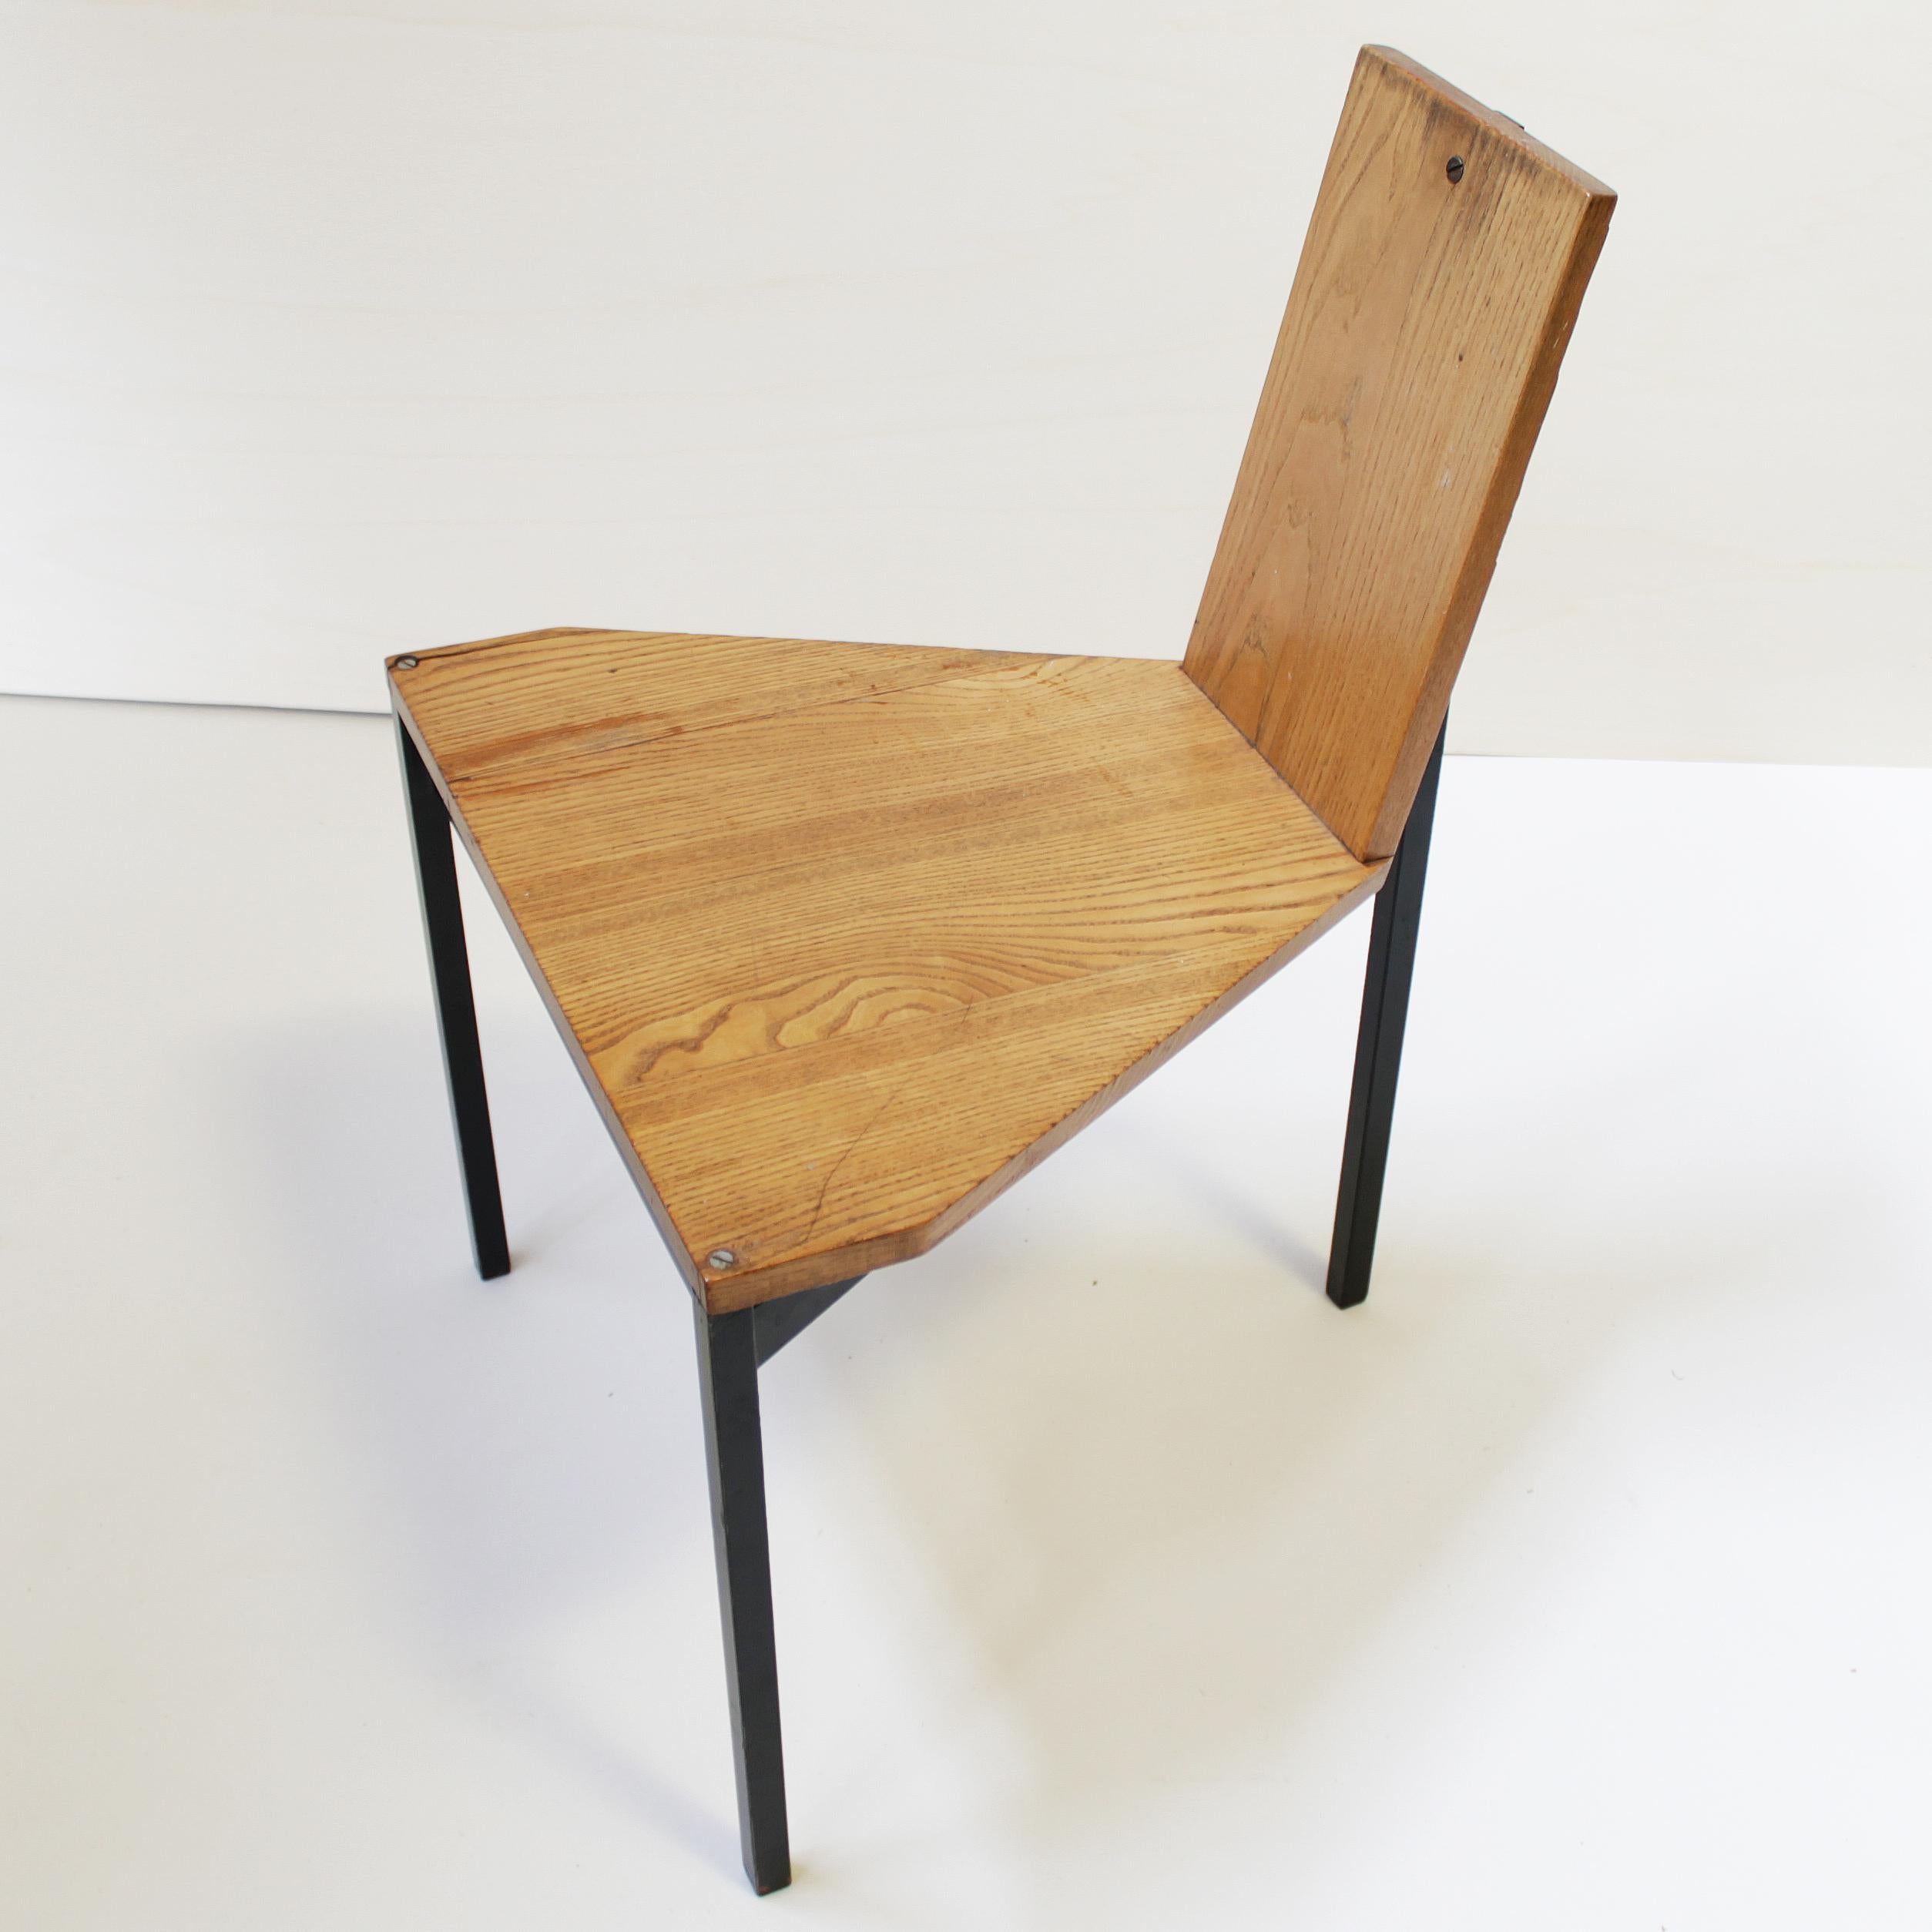 Dining Table and Six '6' Chairs by Wim Den Boon, Netherlands 1958 For Sale 6